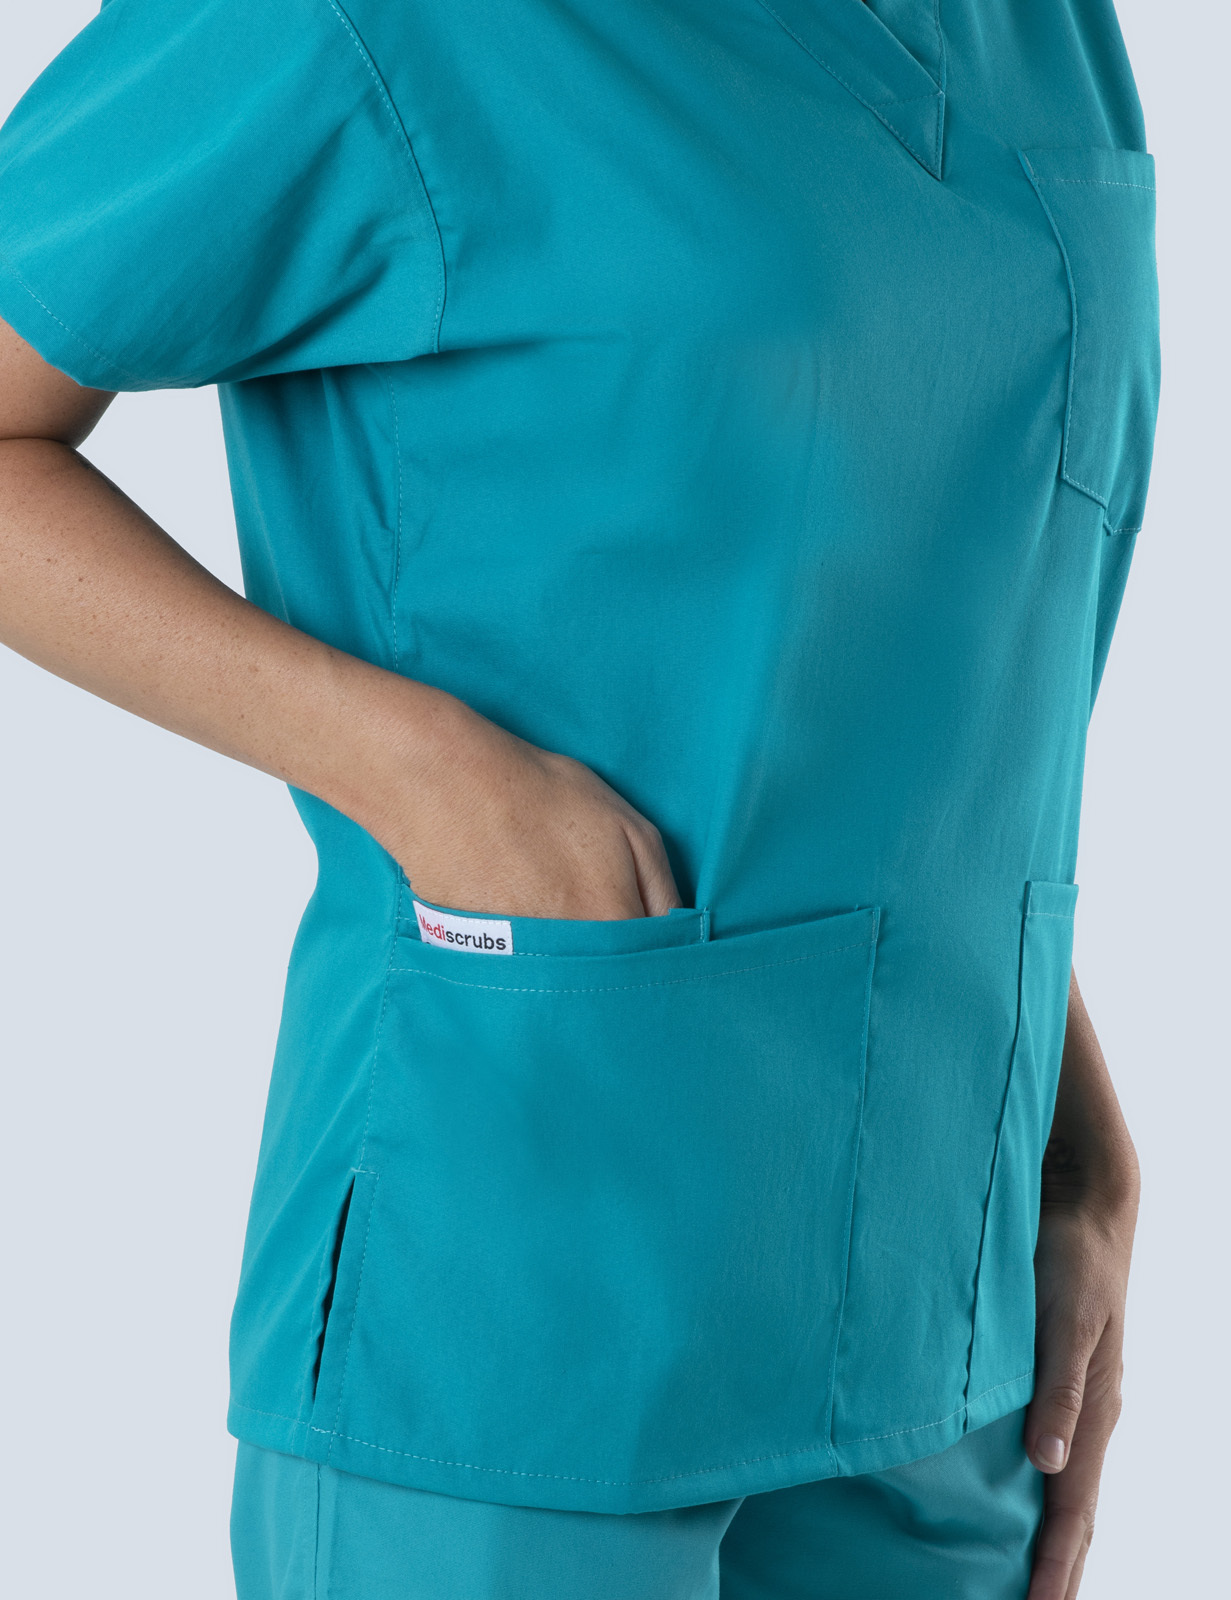 Gold Coast University Hospital - Intensive Care Unit (4 Pocket Scrub Top and Cargo Pants in Teal incl Logos)